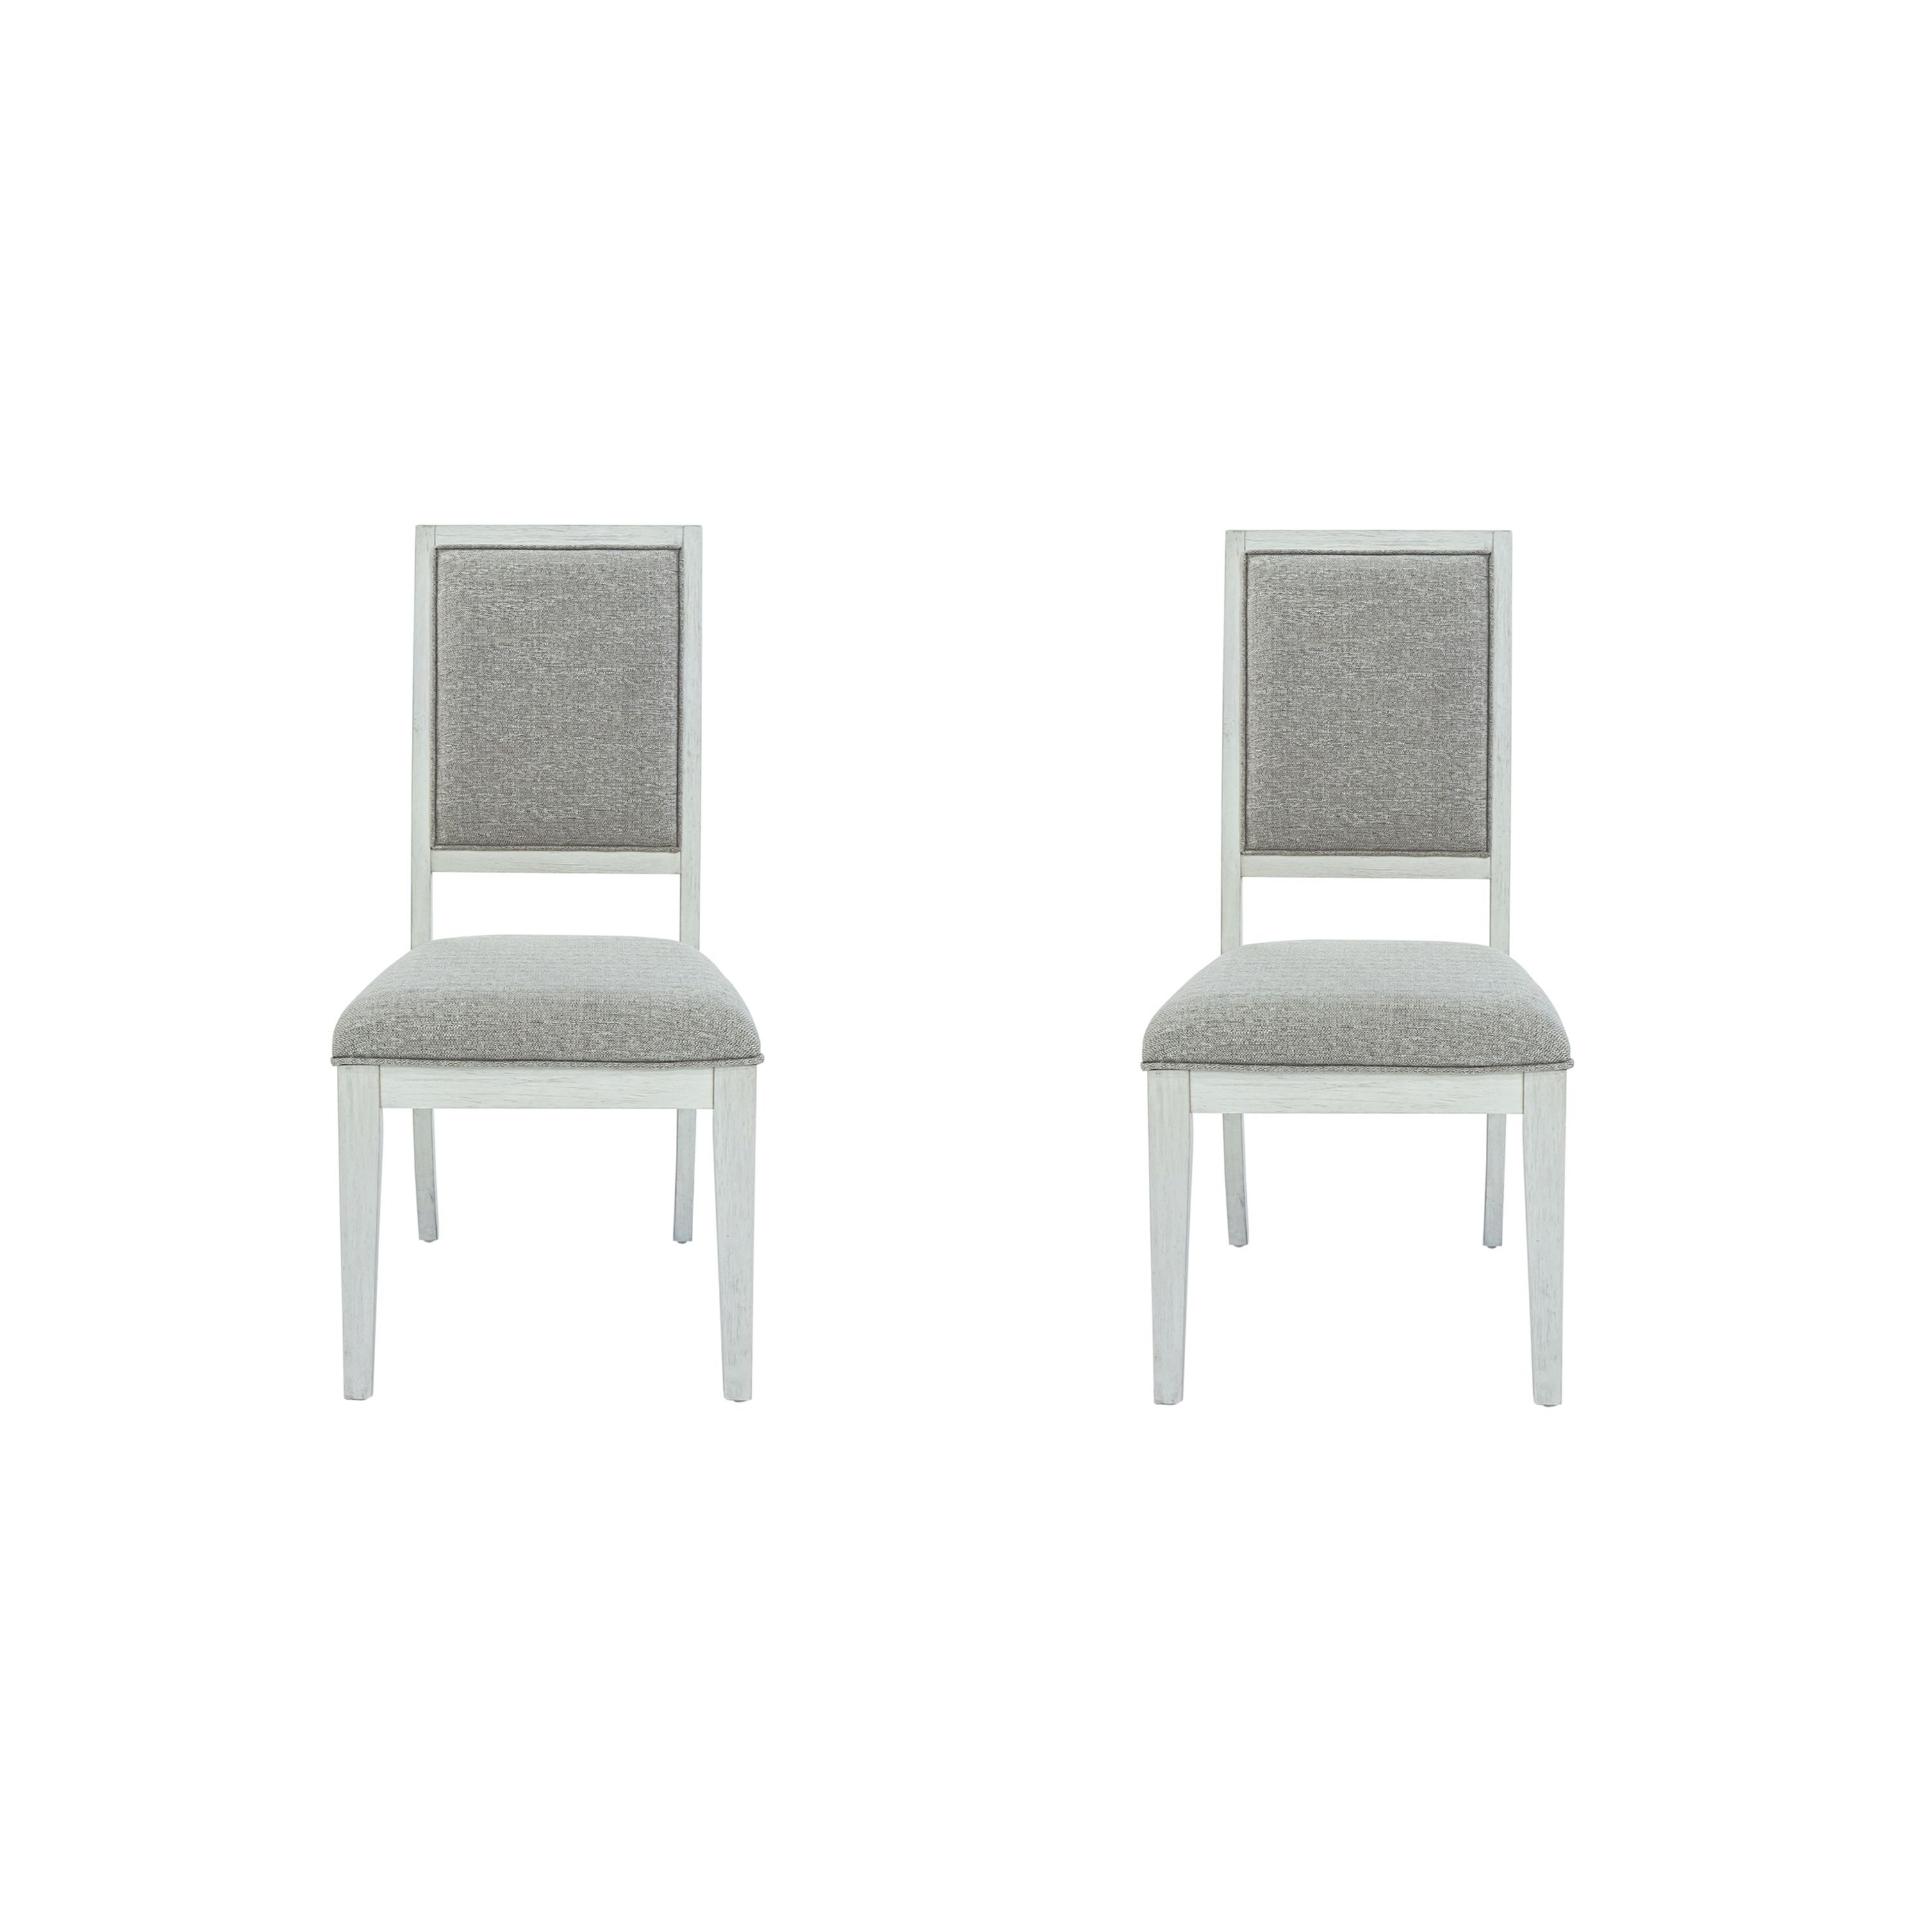 Classic Dining Chair Set Mirage (946-DR) 946-C6501S-Set-2 in White Linen